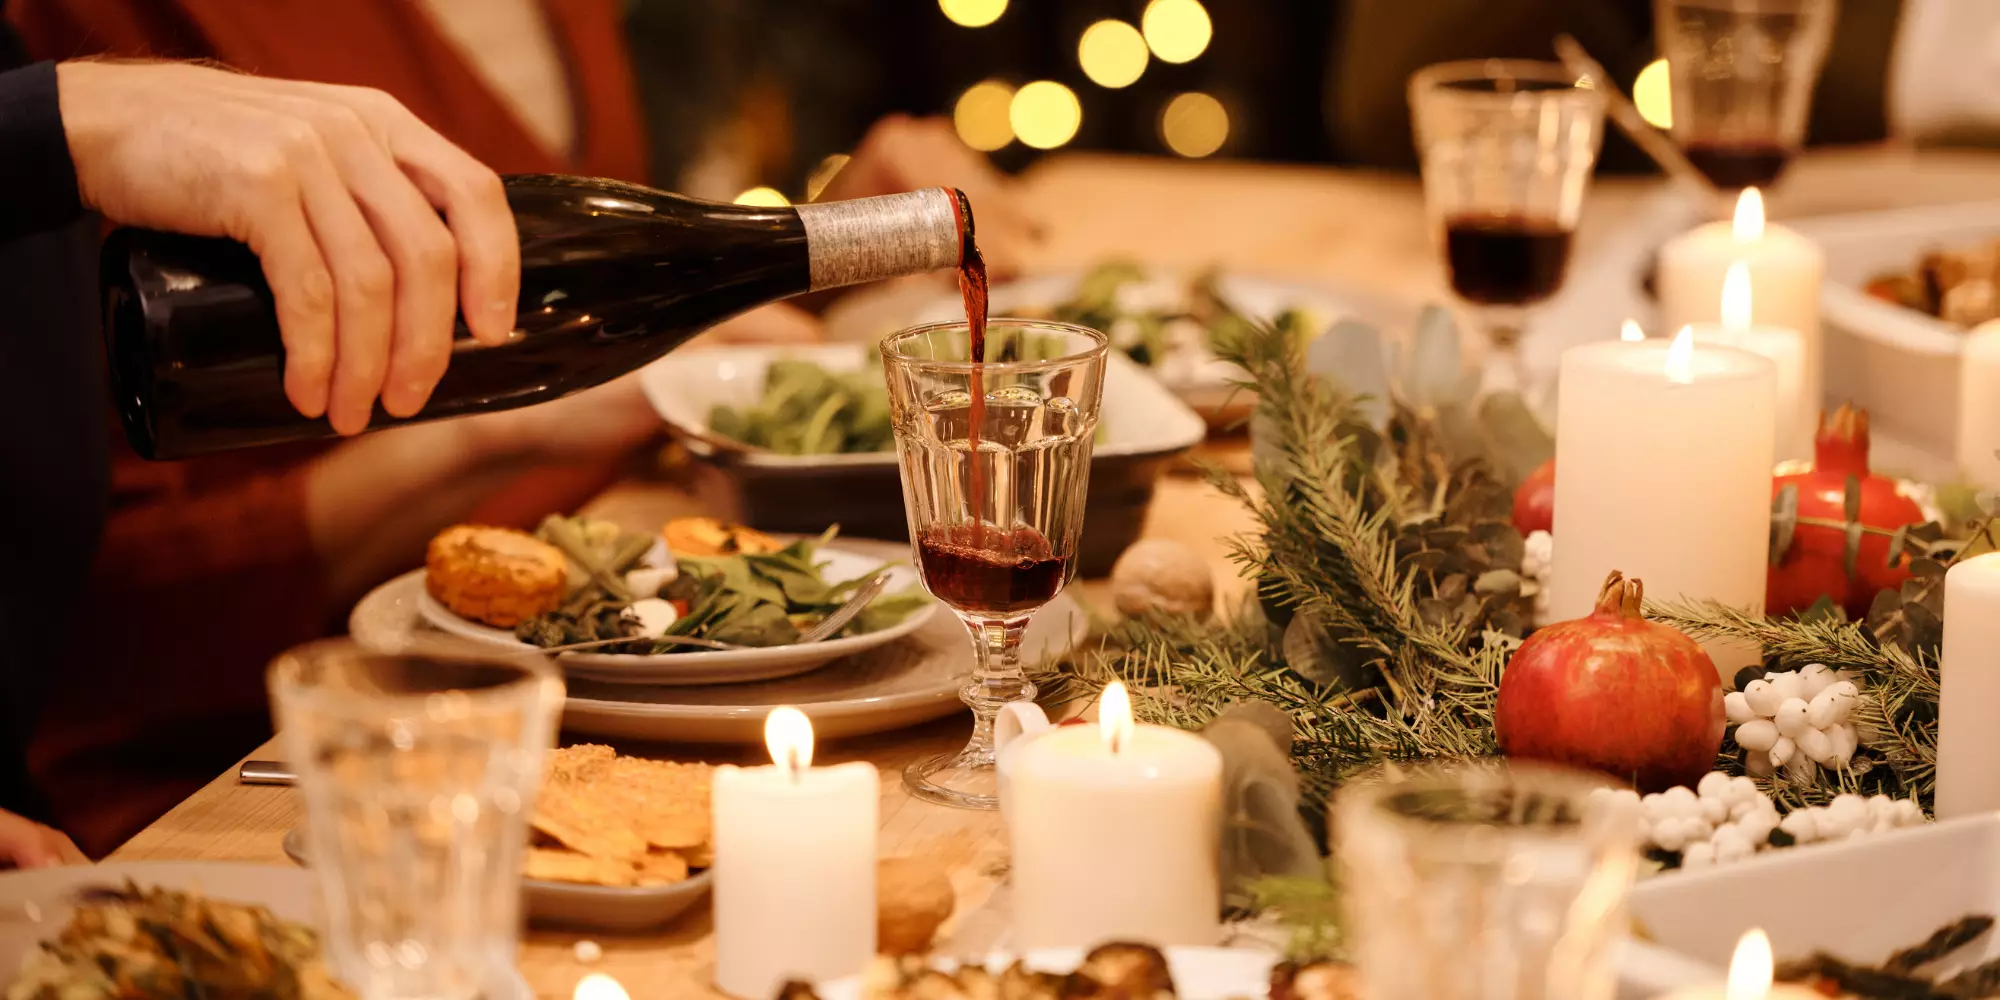 Enjoy the best Virginia wines from Charlottesville at your Thanksgiving meal.